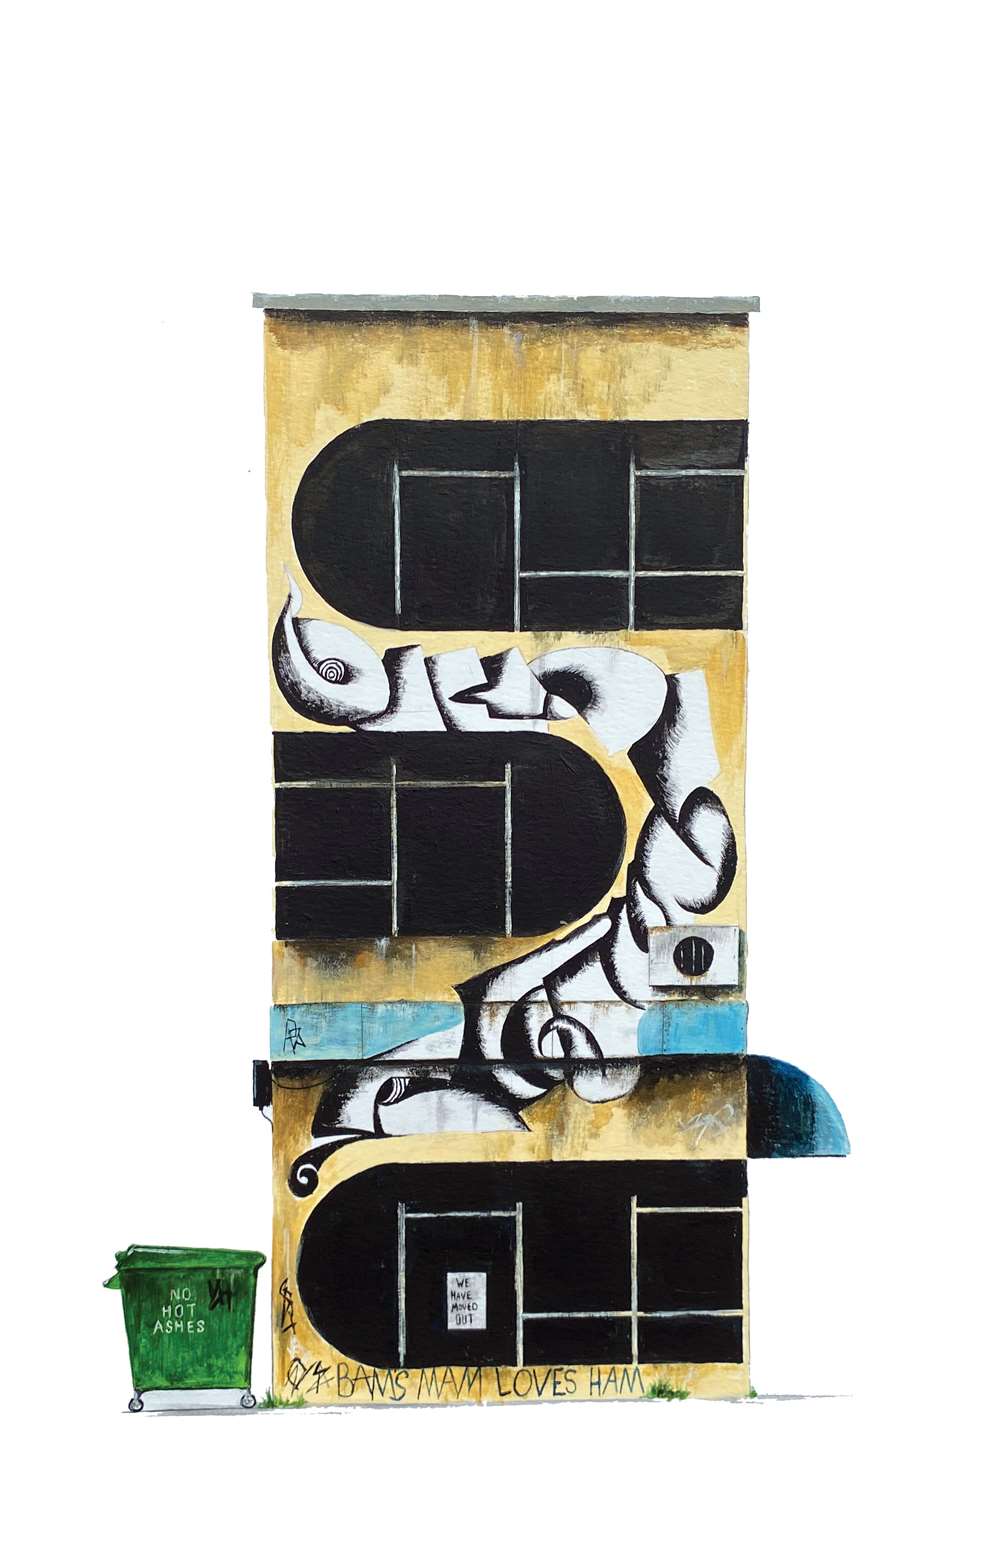 Nick Coupland, Mixed Media architectural illustration of building with graffiti. Pen and ink combined with collage and paint to create a striking bold image.  